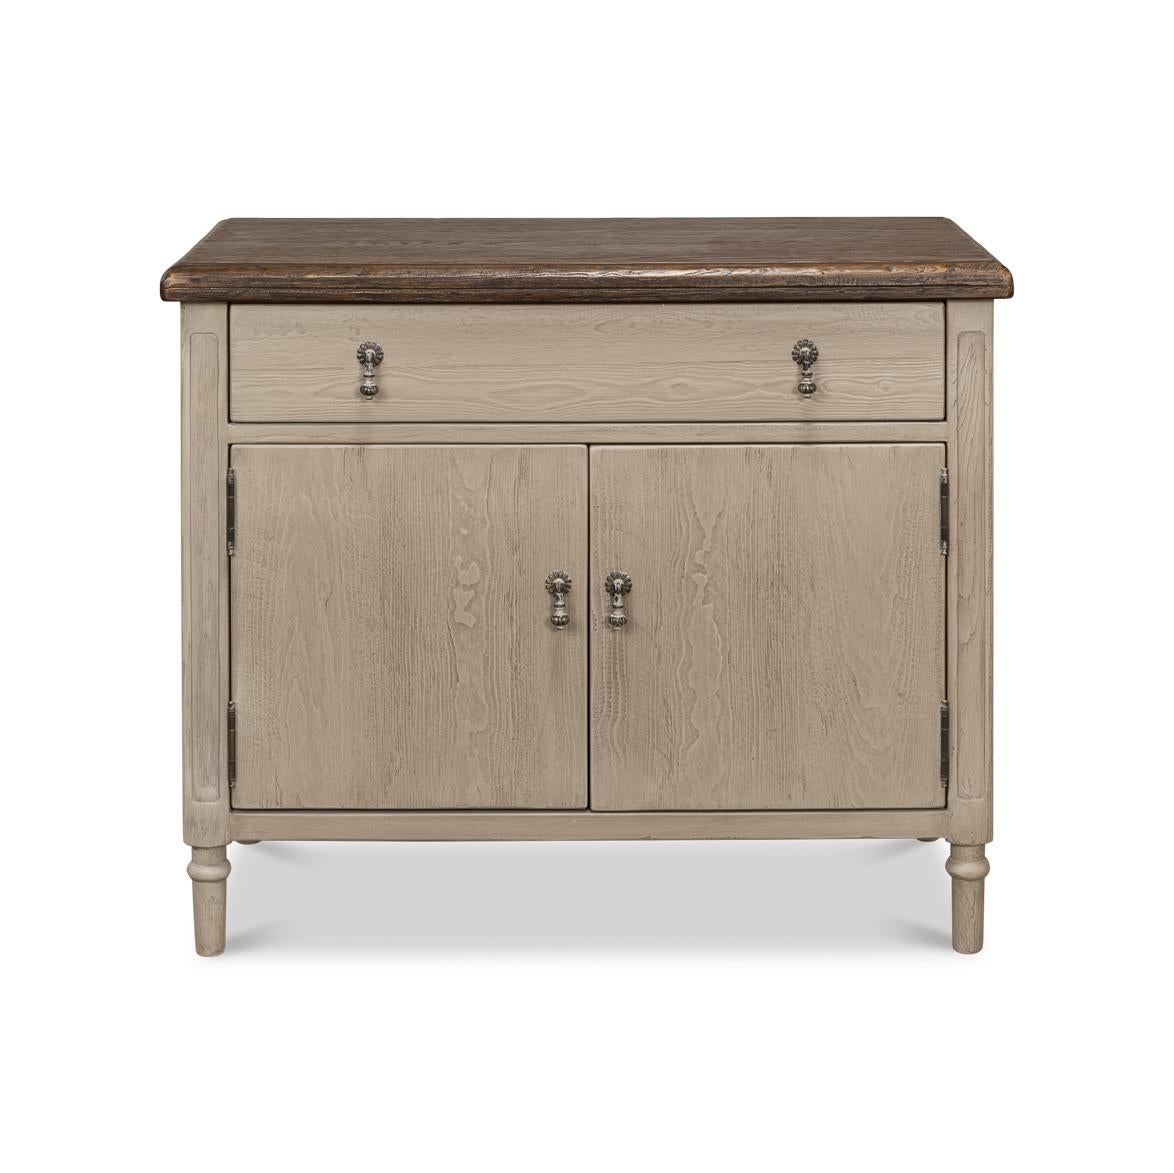 The perfect addition to any elegant and sophisticated living space, this beautiful piece boasts a natural finish oak top with a molded edge, creating a sleek and refined look. The top is contrasted by a soft grey painted base that adds a touch of